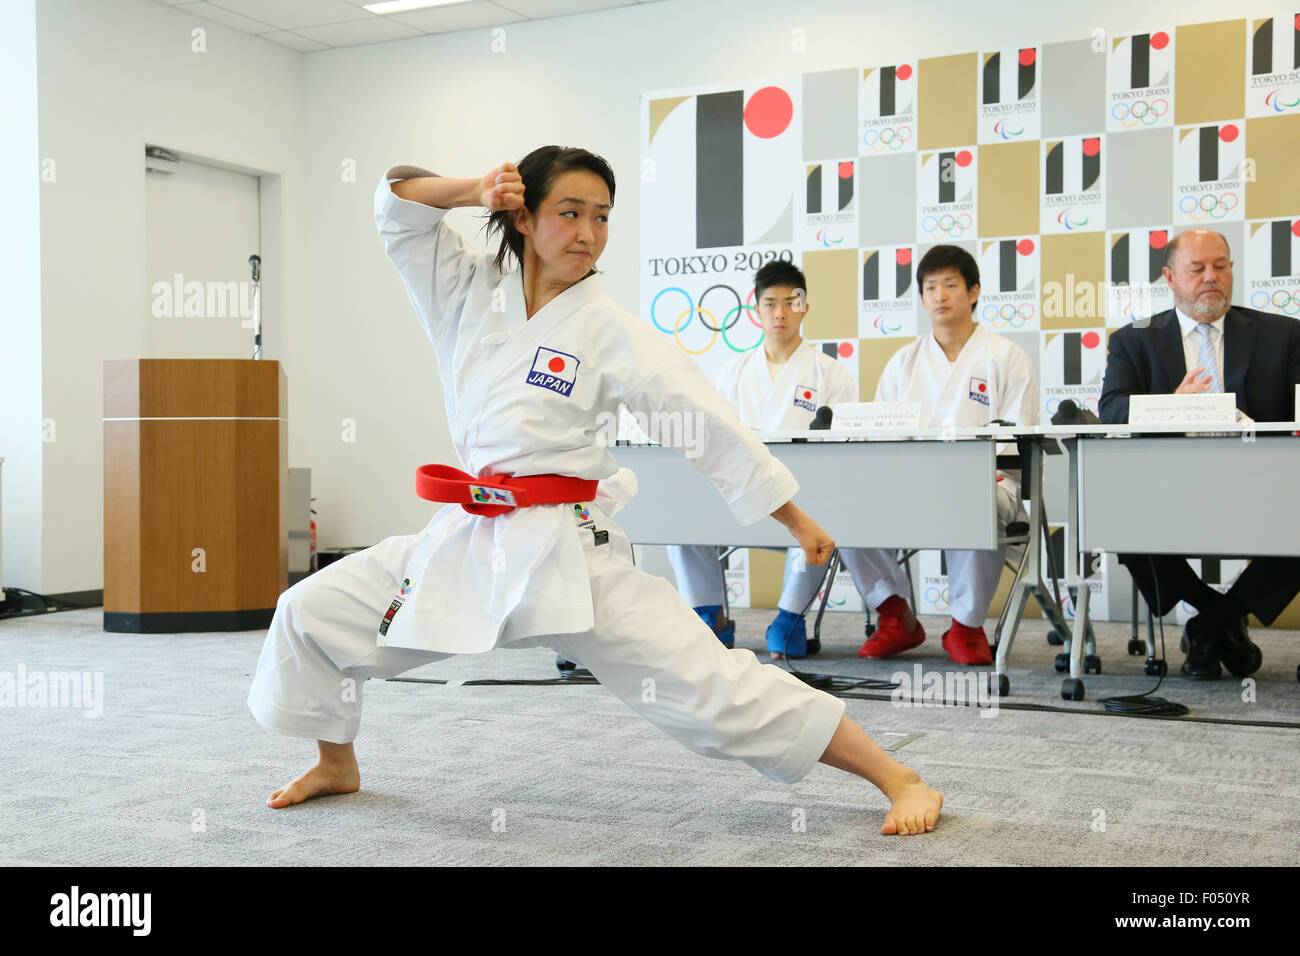 Kiyou Shimizu, AUGUST 7, 2015 : World Karate Federation (WKF) holds a media  conference following its interview